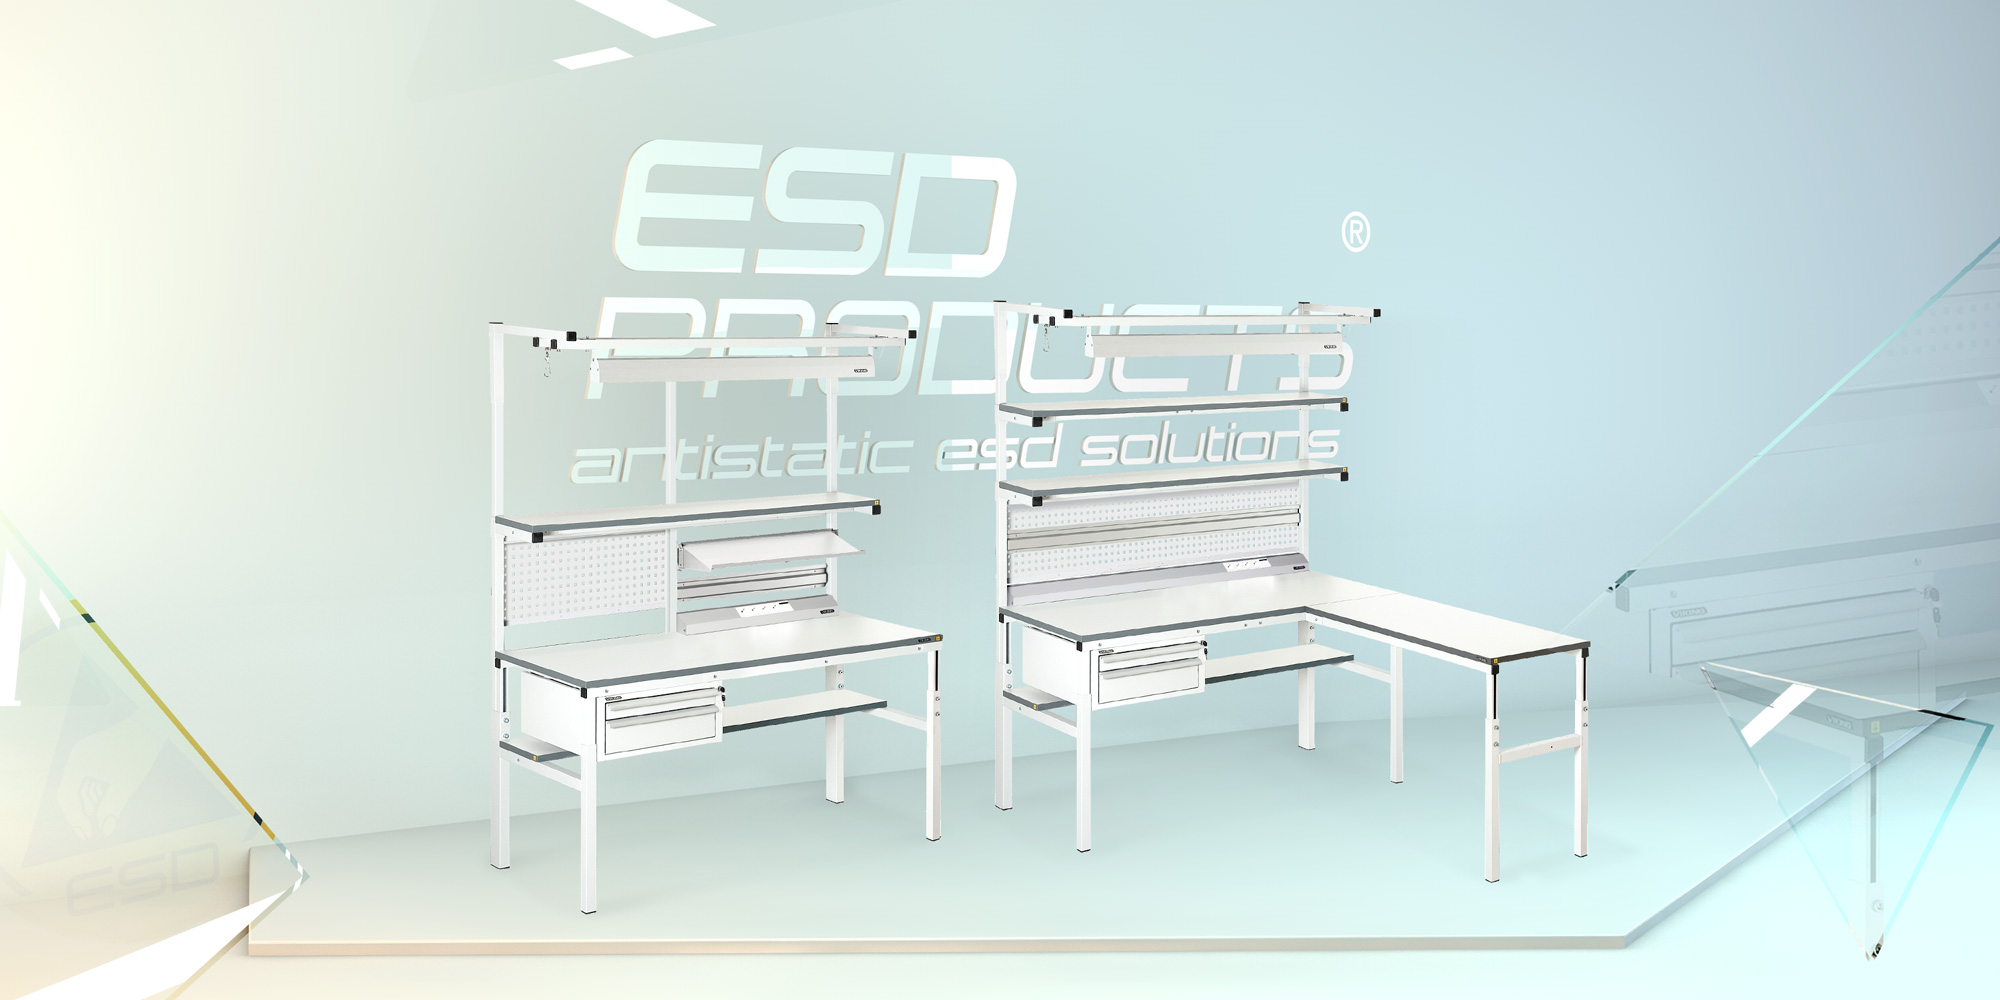 ESD-Workbench-Anti-Static-Workstations-ESD-safe-Workbenches-ESD-Workbenches-Classic-ESD-Products